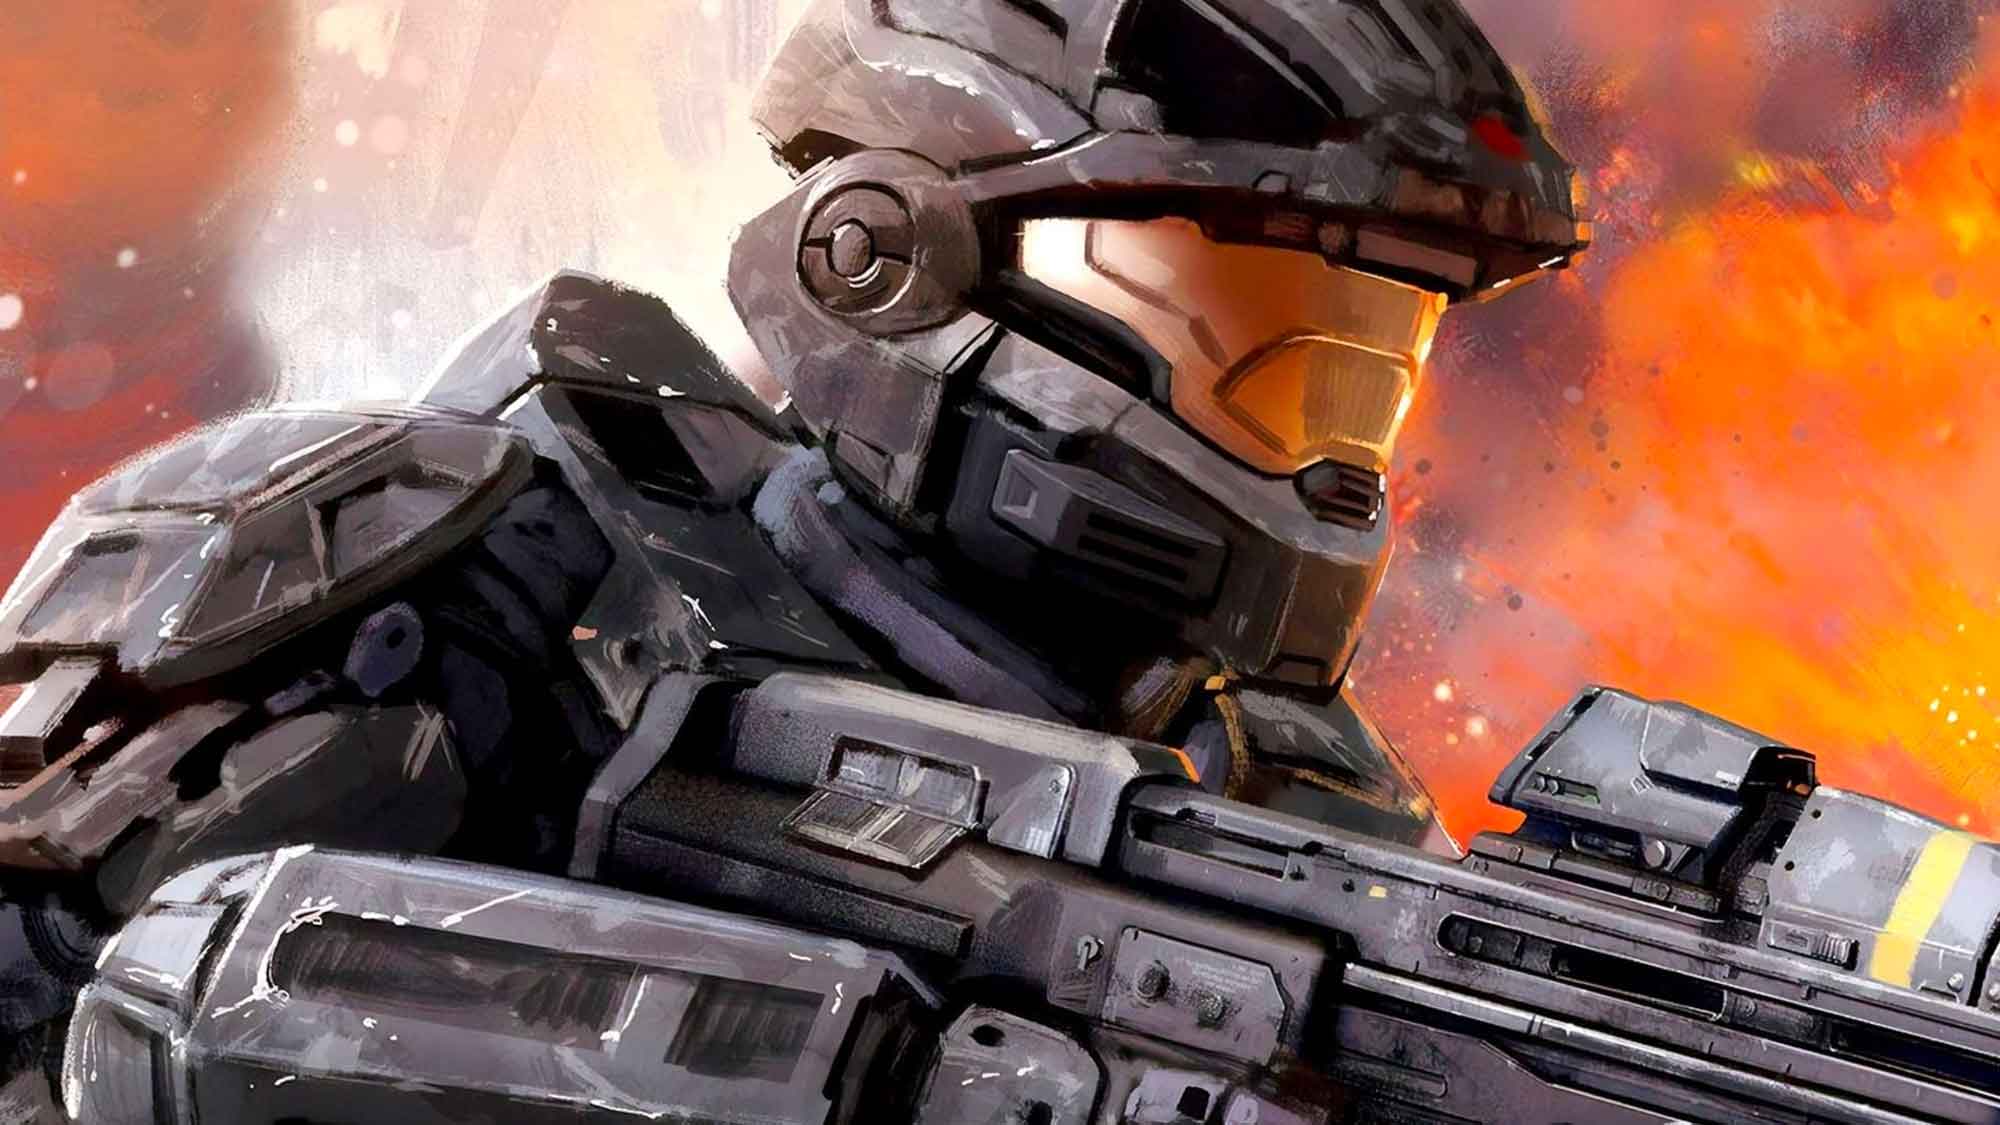 Halo 4: Halo Sales Break $200 Million On The First Day